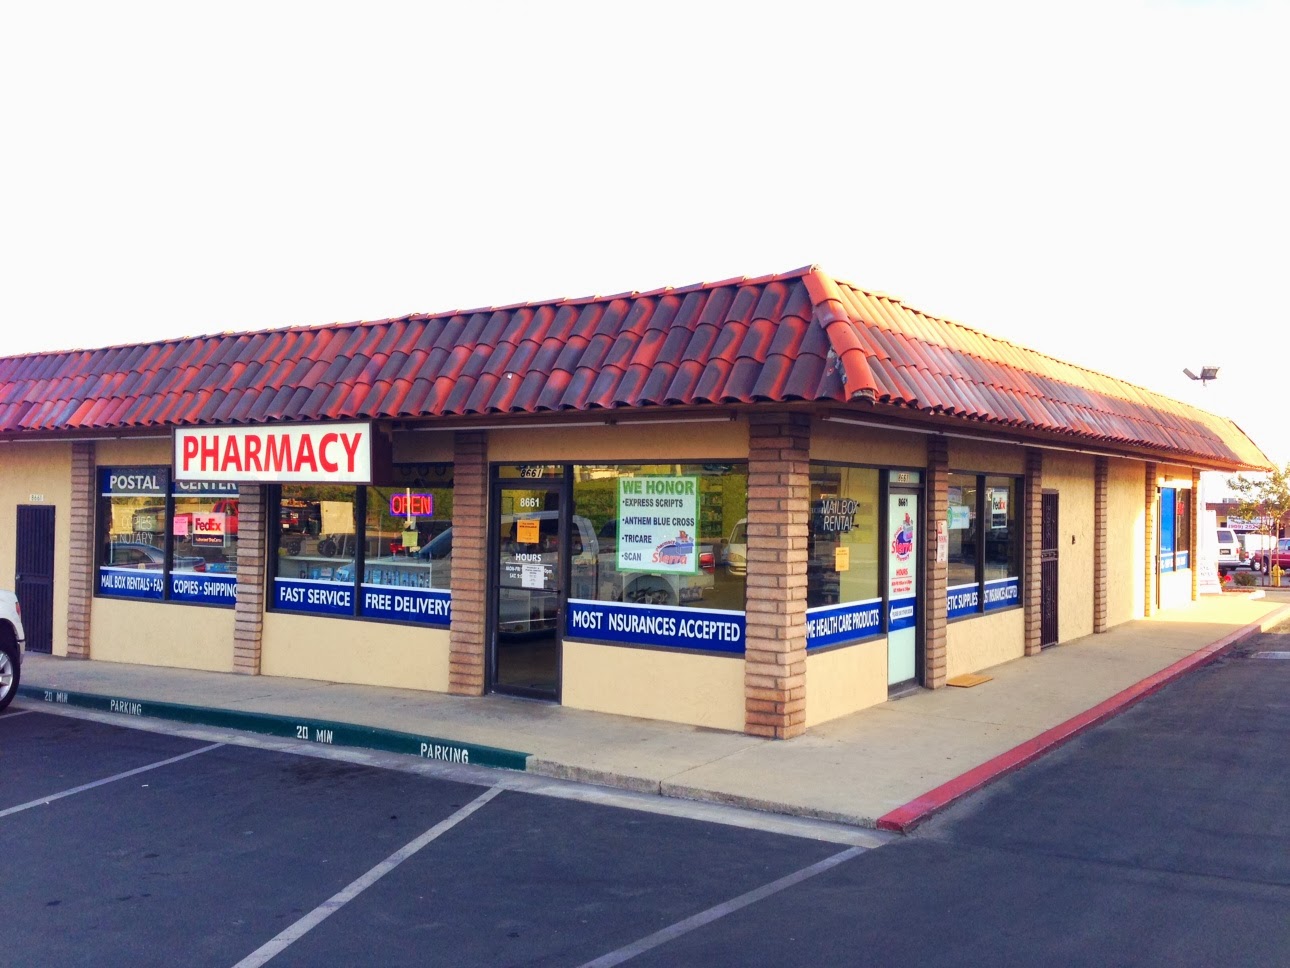 Sierra Pharmacy Compounding & Medical Supplies